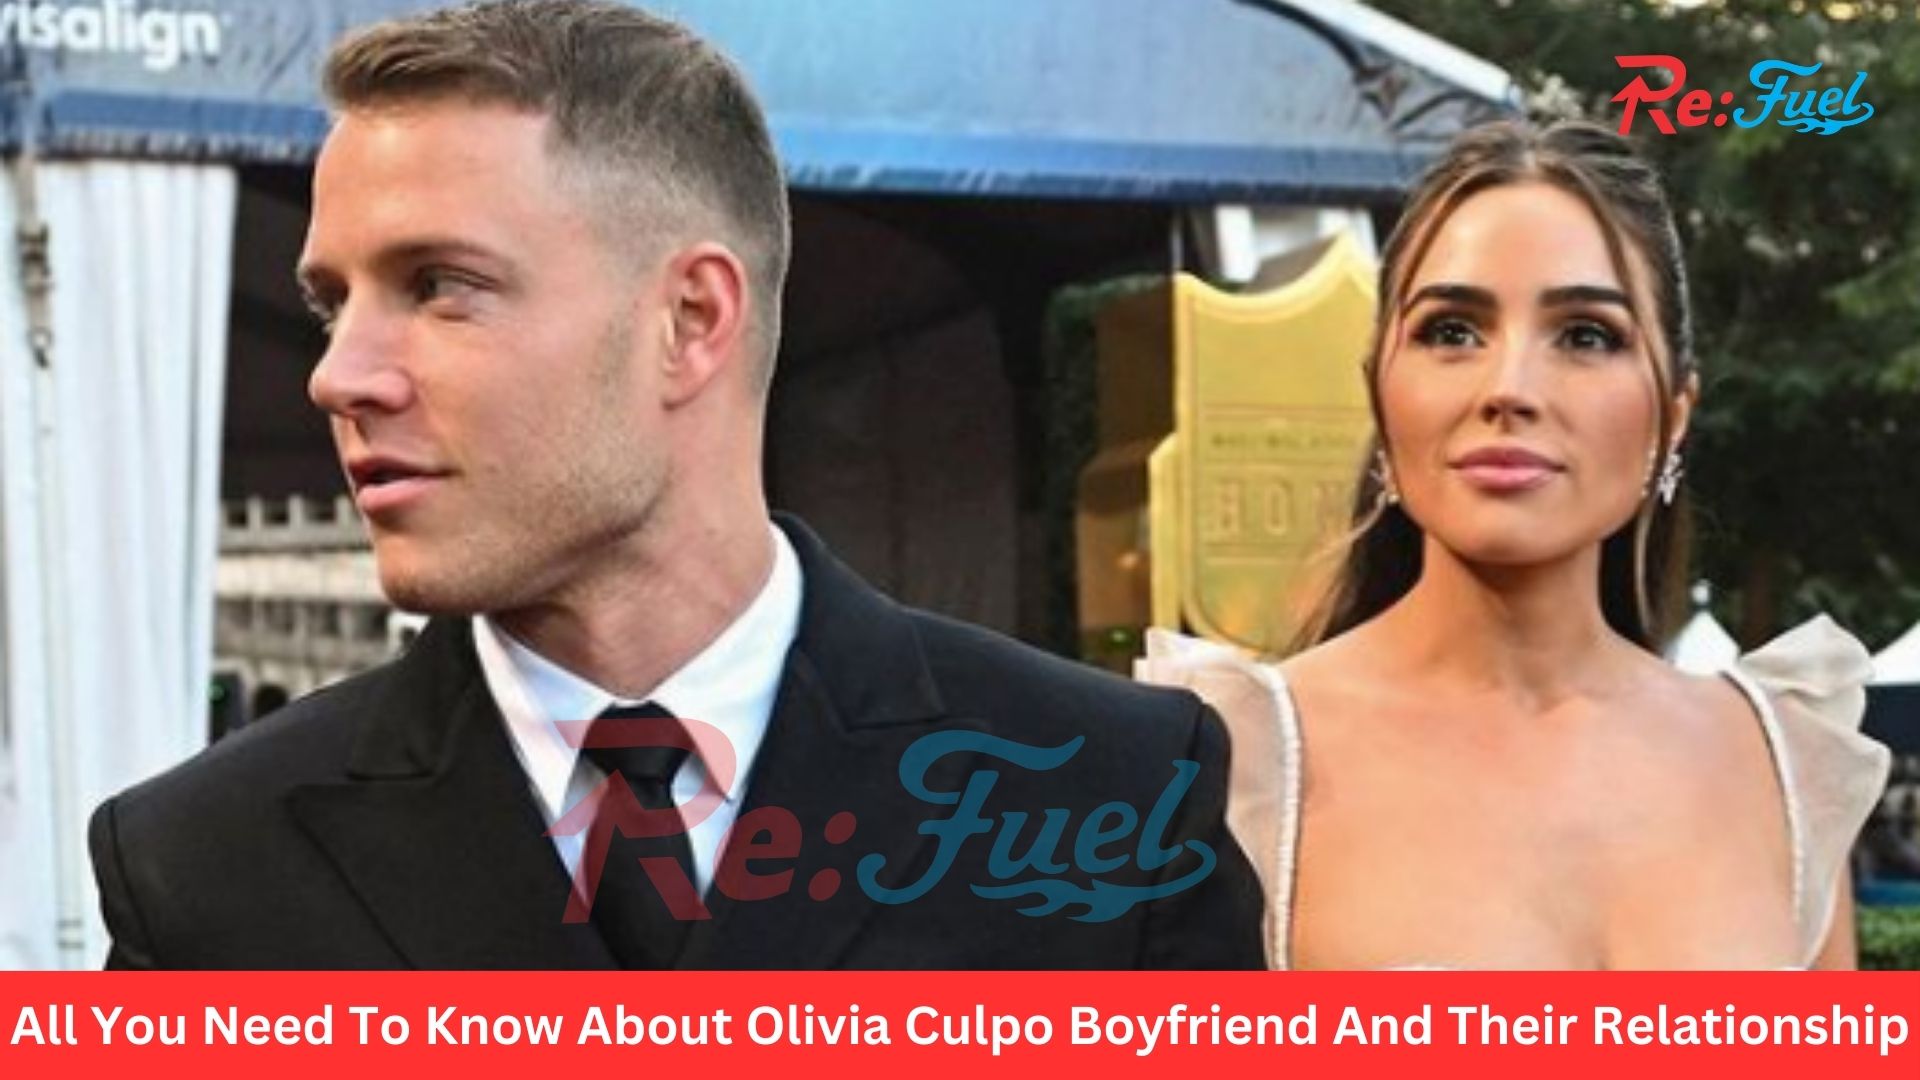 All You Need To Know About Olivia Culpo Boyfriend And Their Relationship